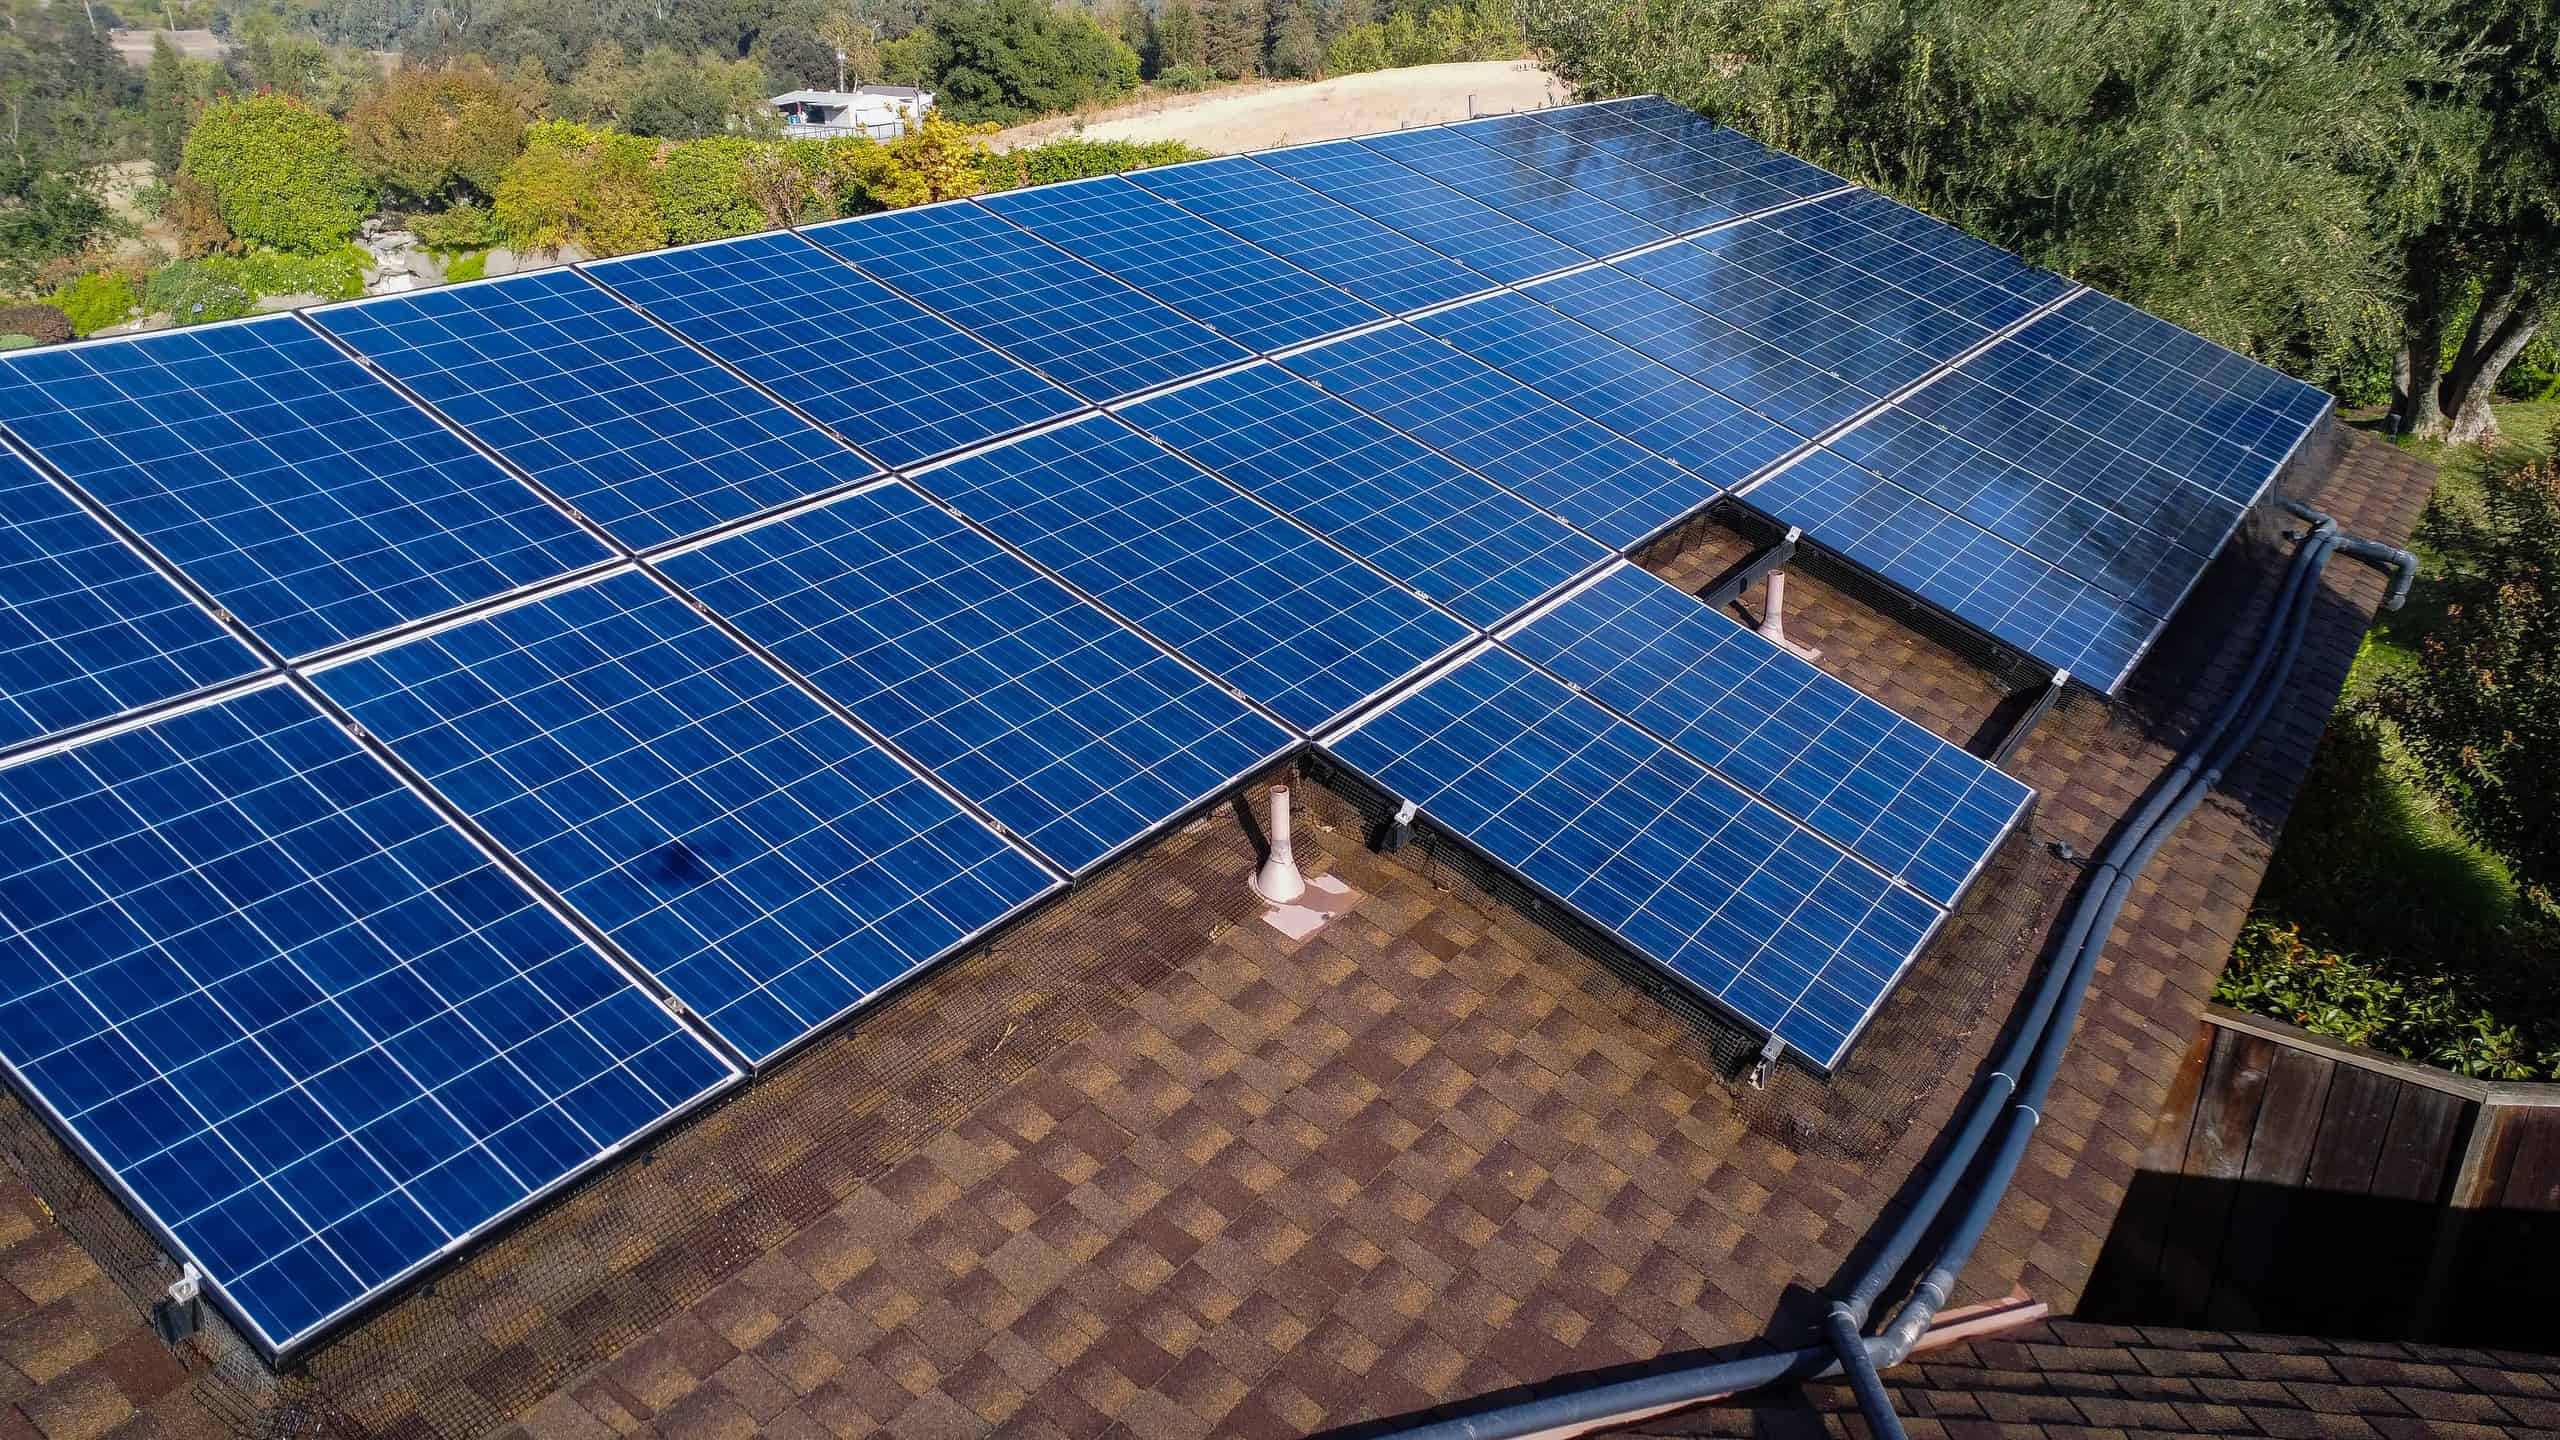 nice image of solar panels in action